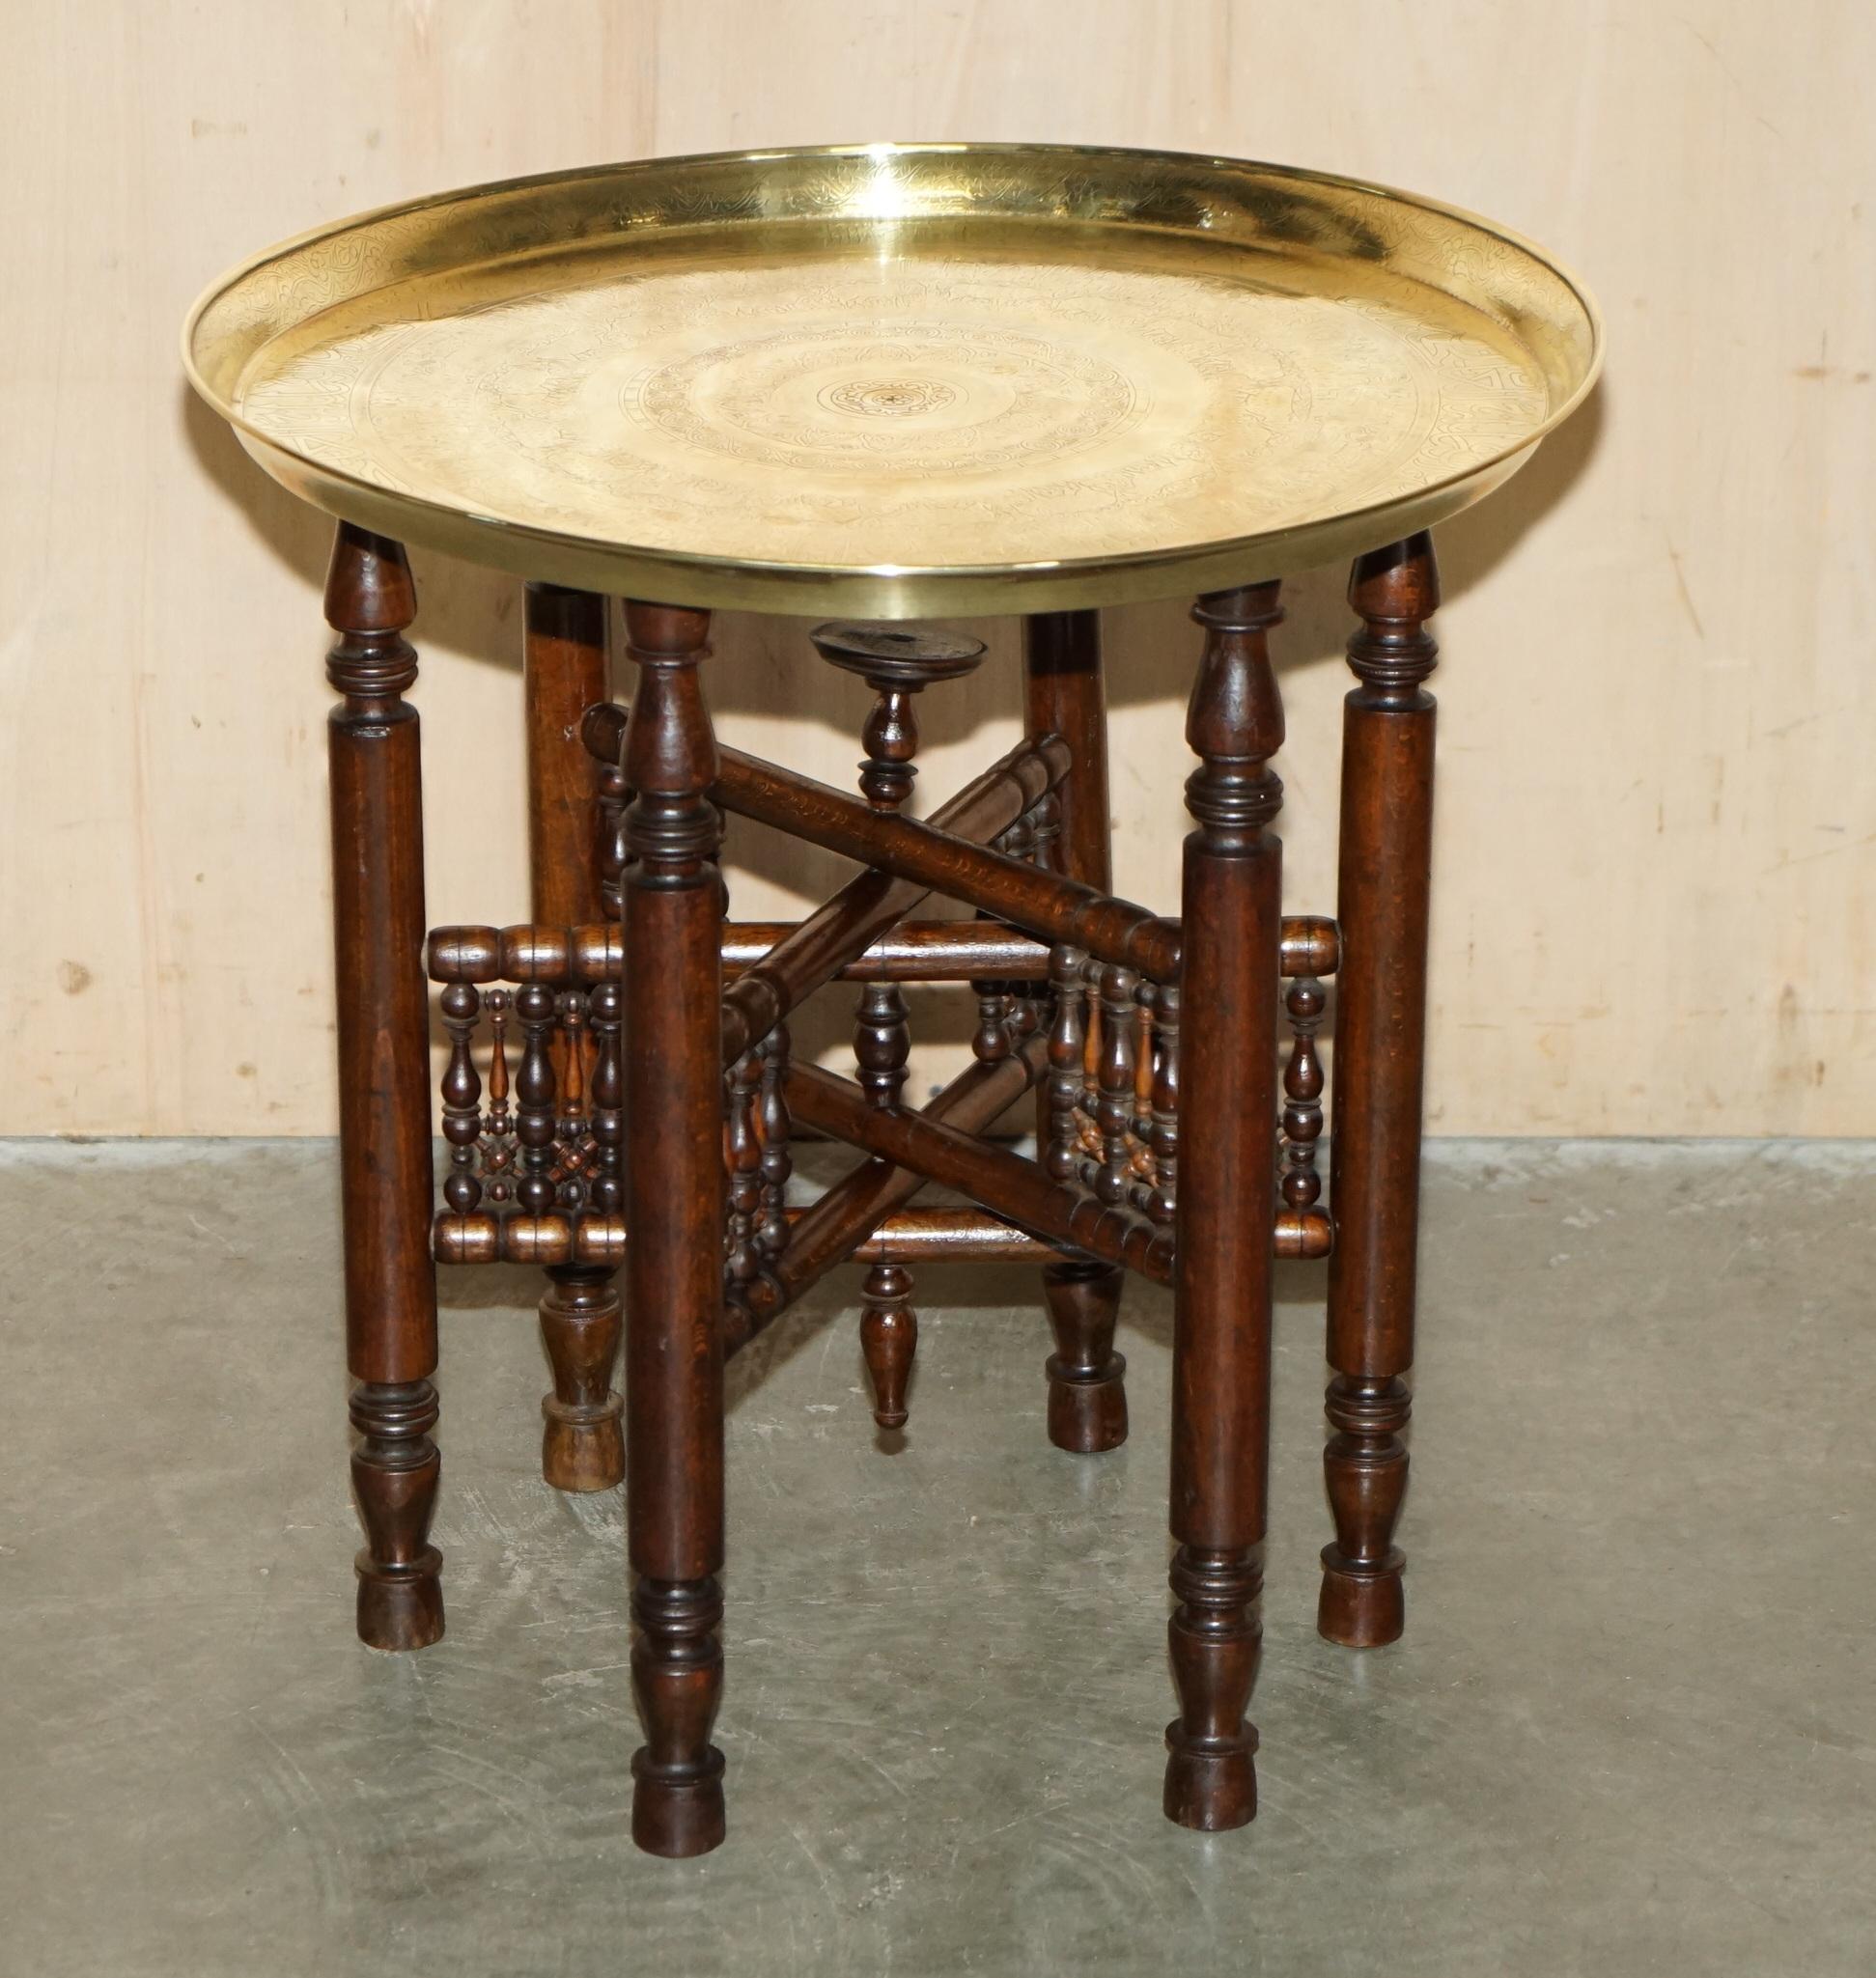 Royal House Antiques

Royal House Antiques is delighted to offer for sale this ornately hand carved Moroccan brass tray table retailed through Liberty's in the 1880-1900's with freshly polished top

Please note the delivery fee listed is just a